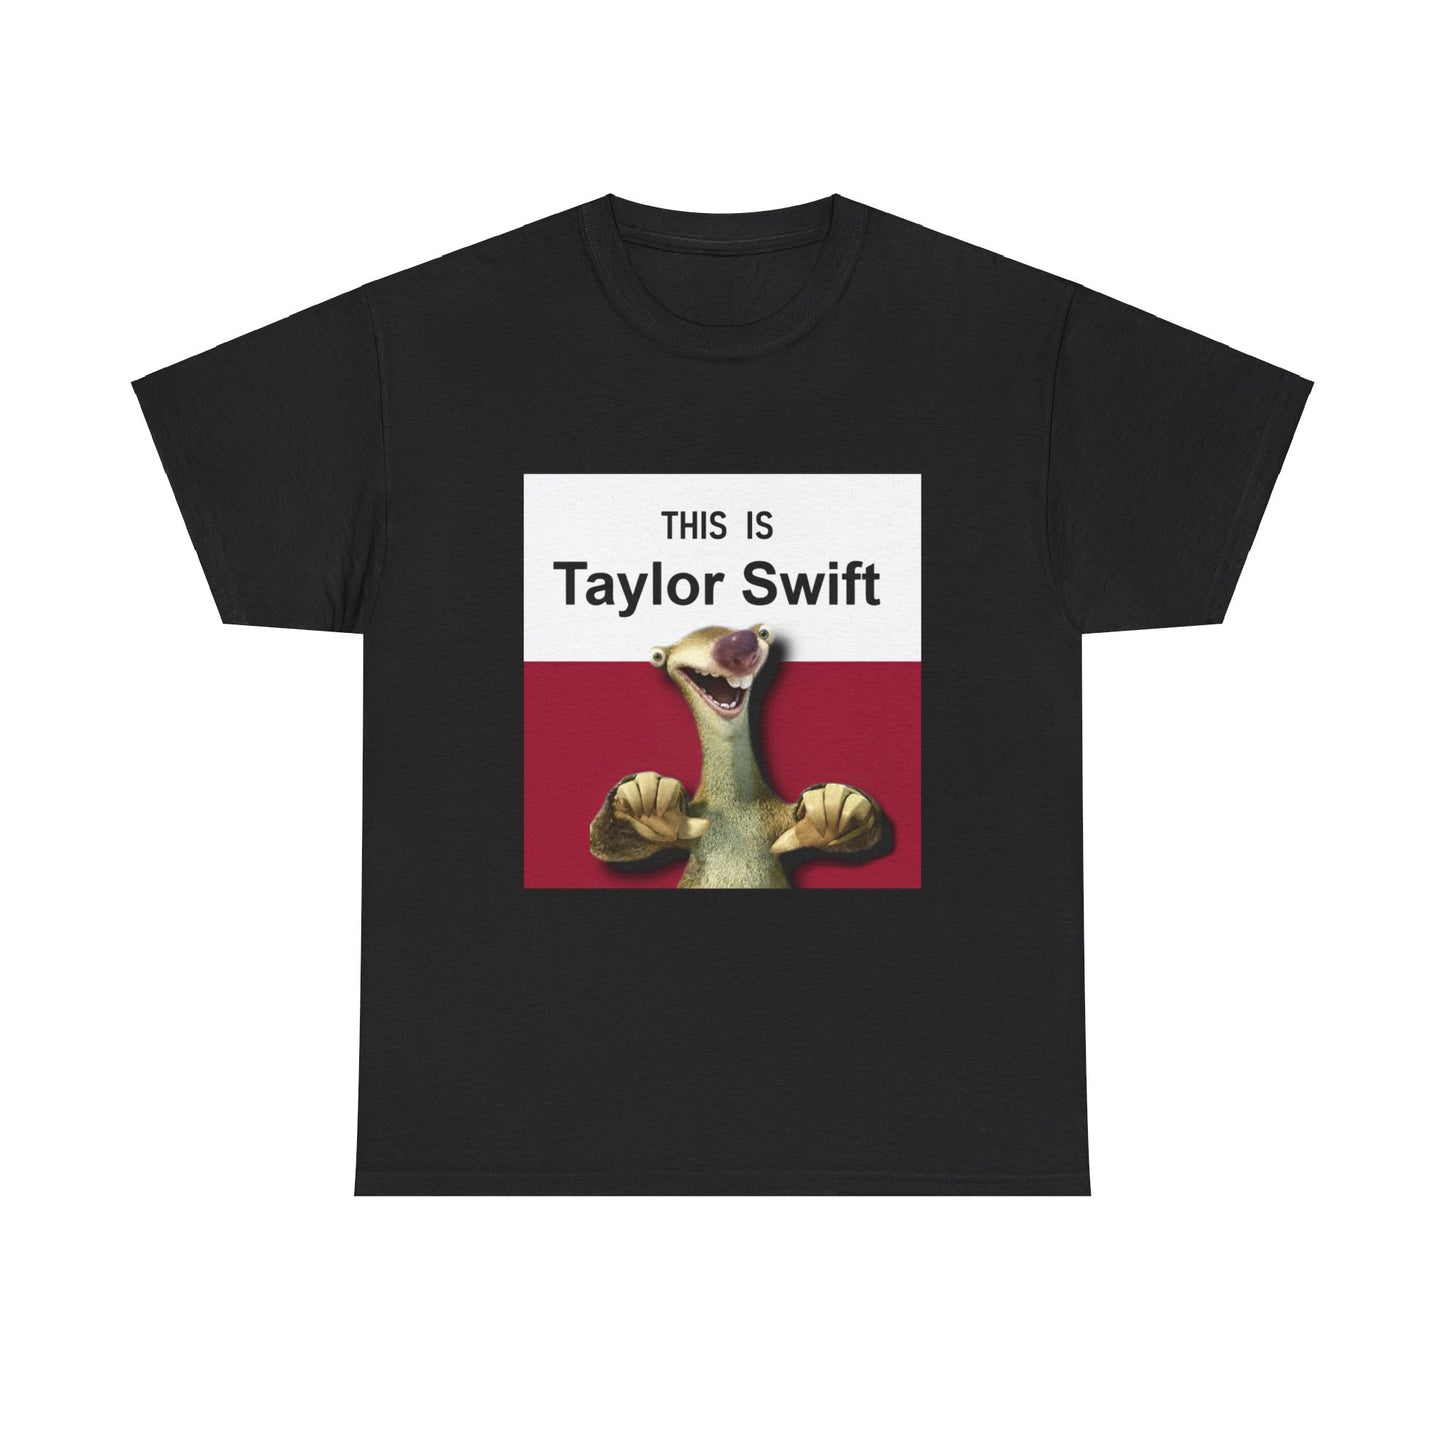 This is Taylor Swift T-shirt